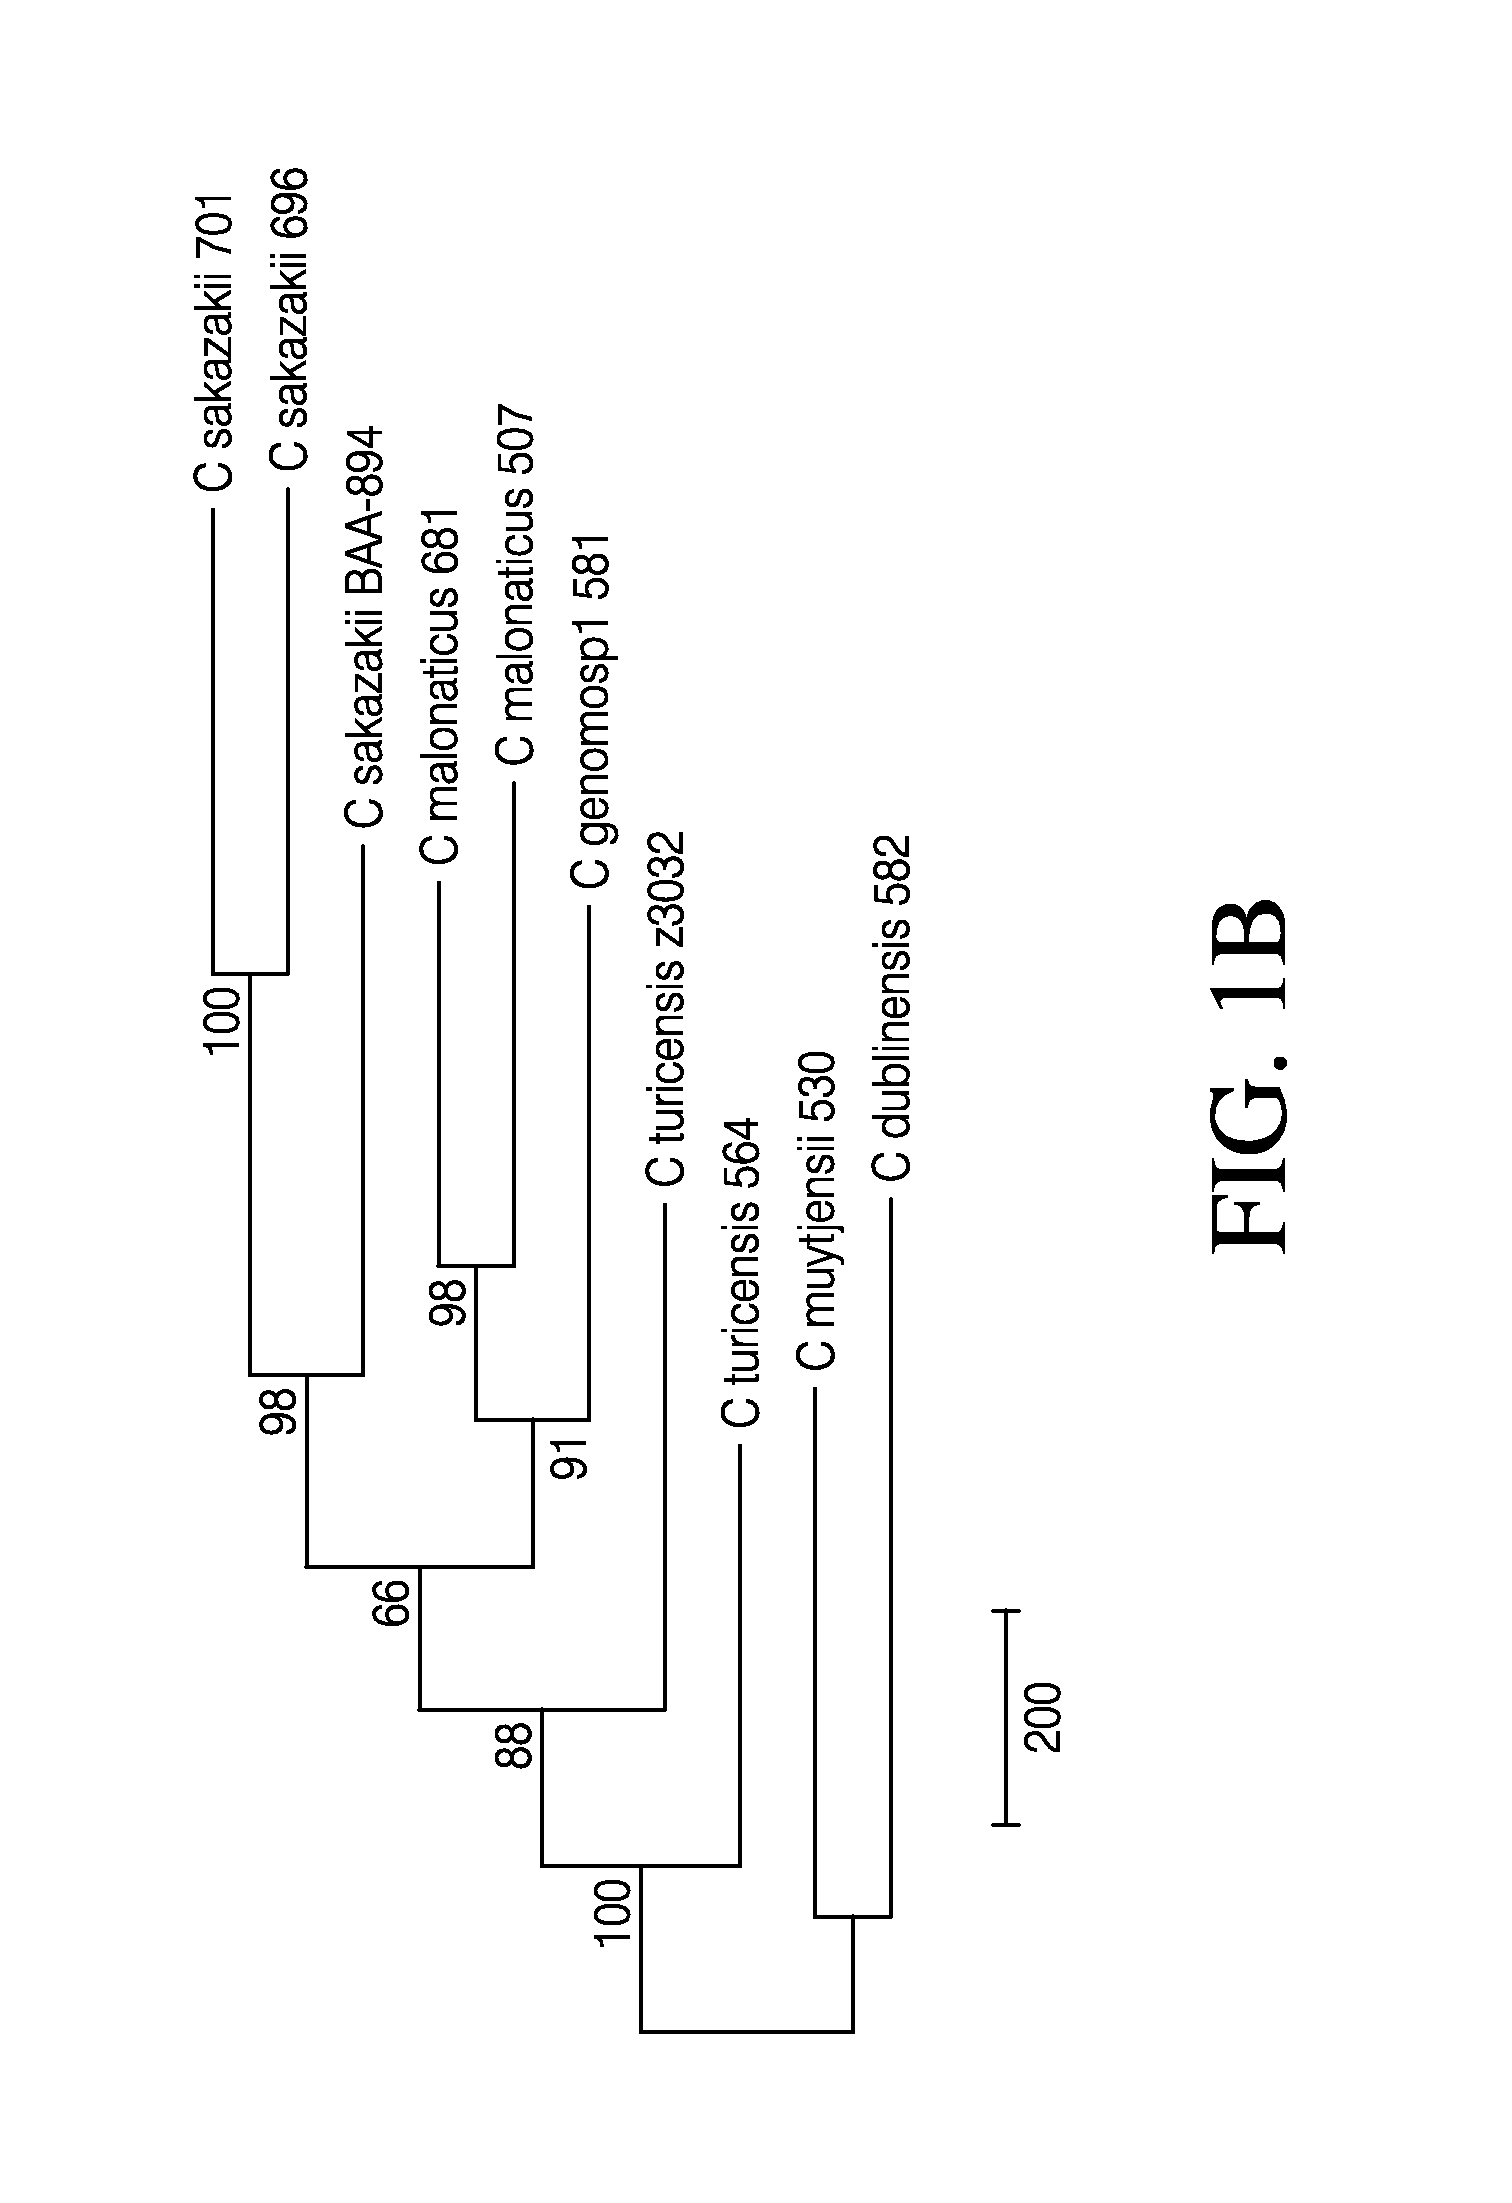 Compositions and methods for detection of cronobacter spp. and cronobacter species and strains